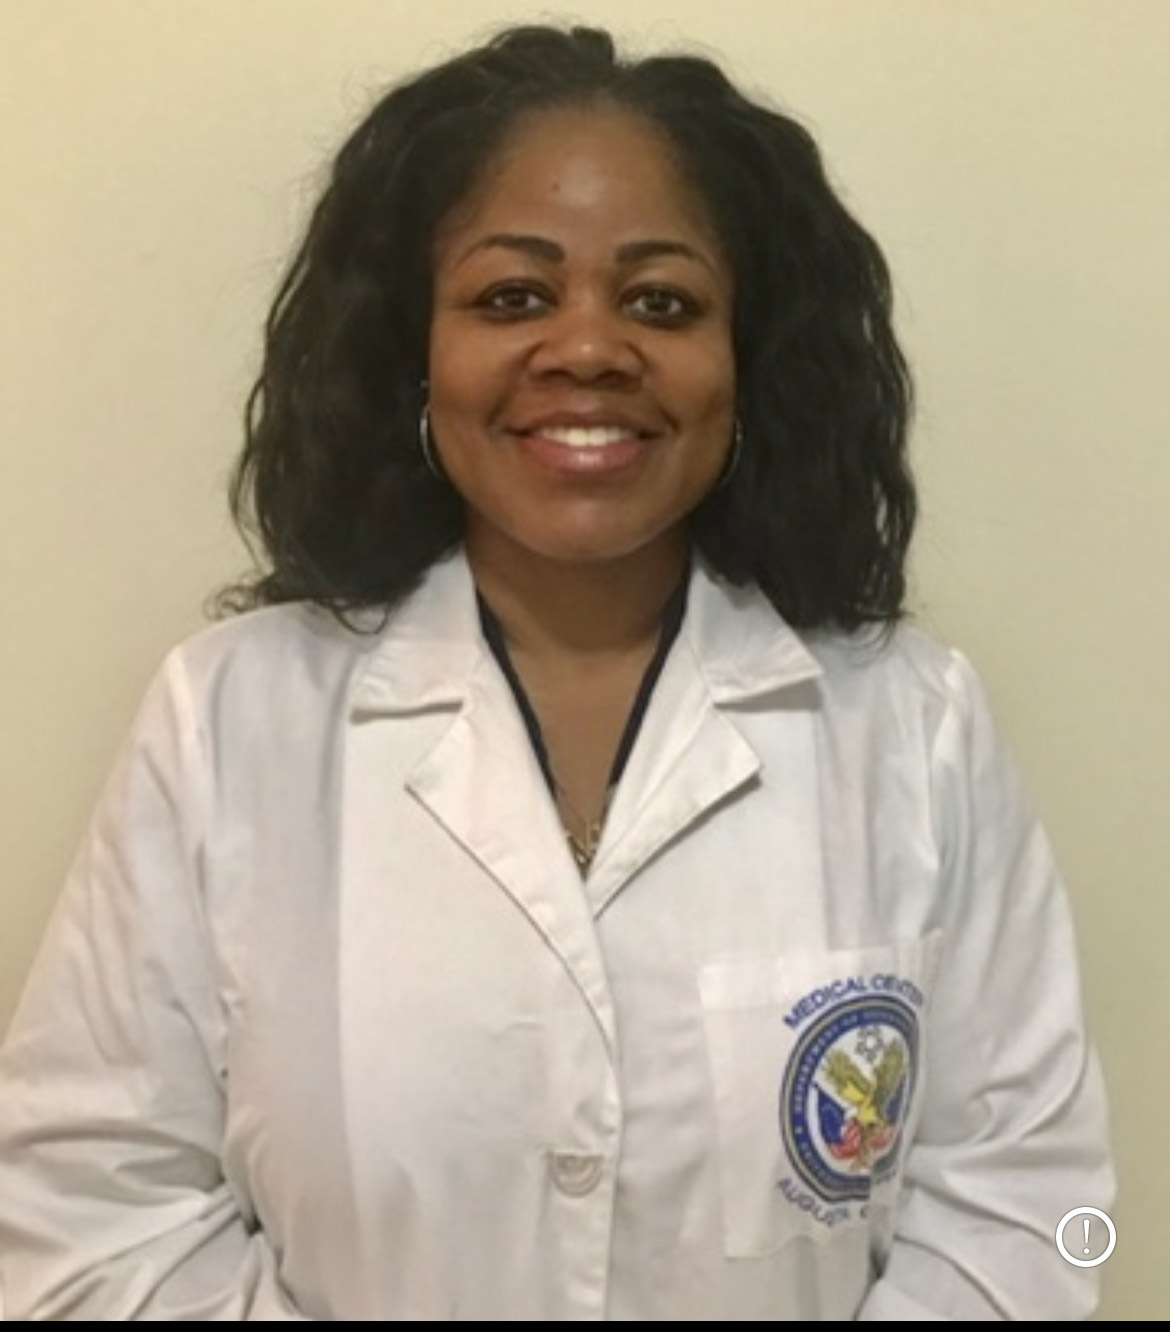 Kimberly T. Fountain, M.D., M.S.